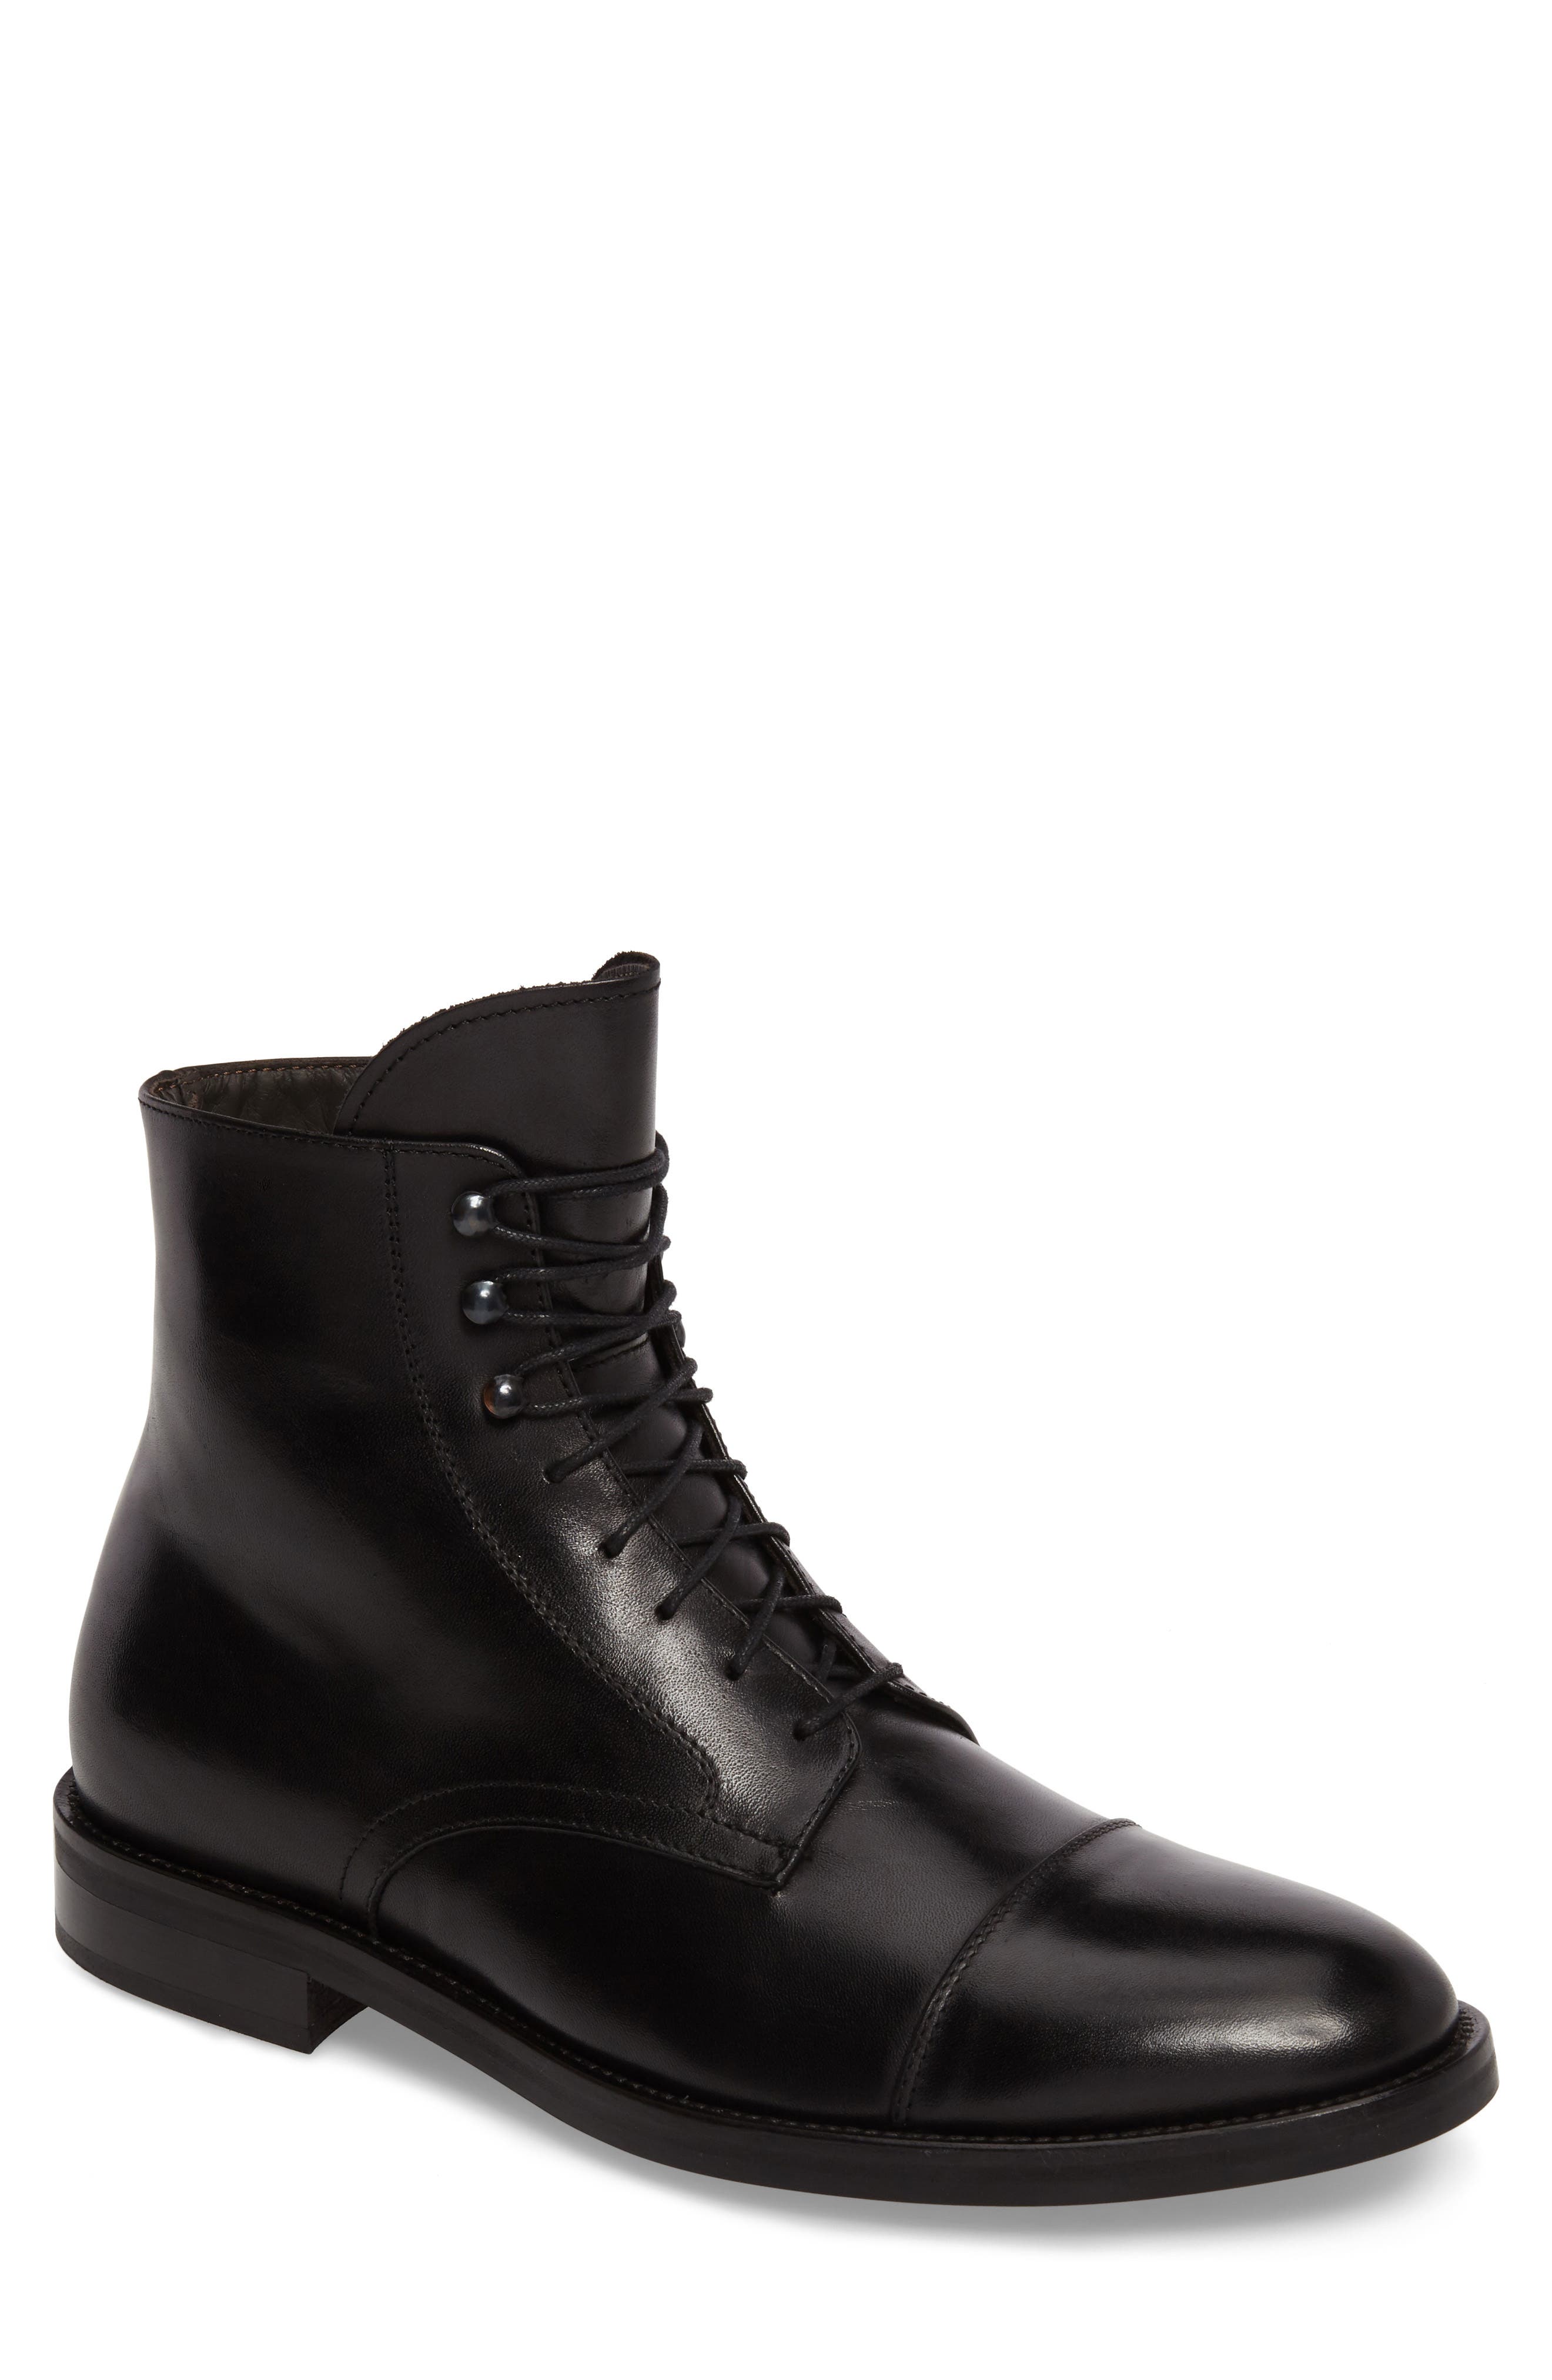 dr martens safety boots arco